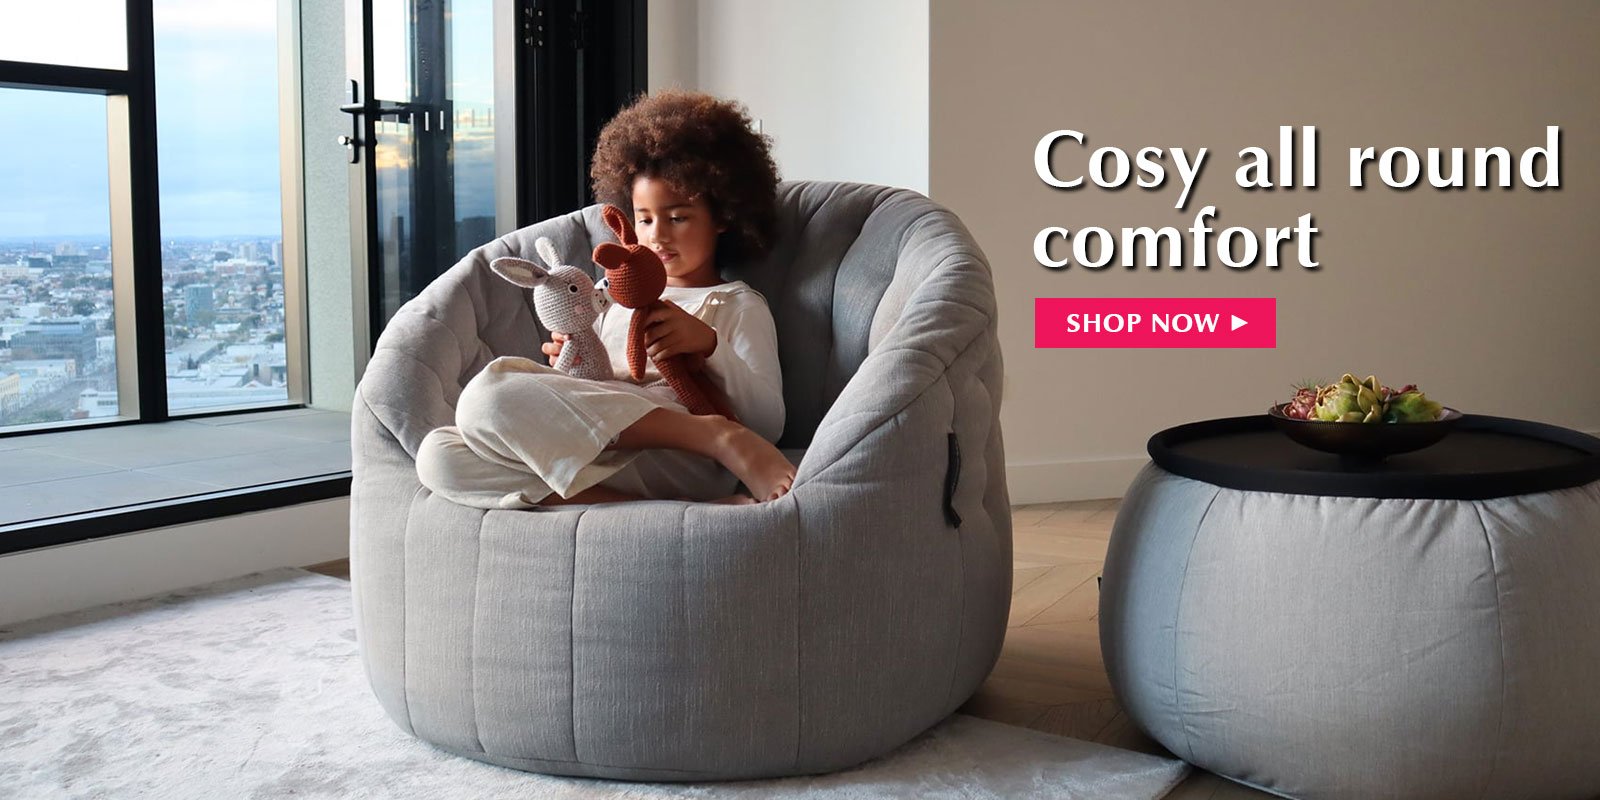 Cuddle up to Butterfly Sofa and Versa Table for cosy all round comfort.